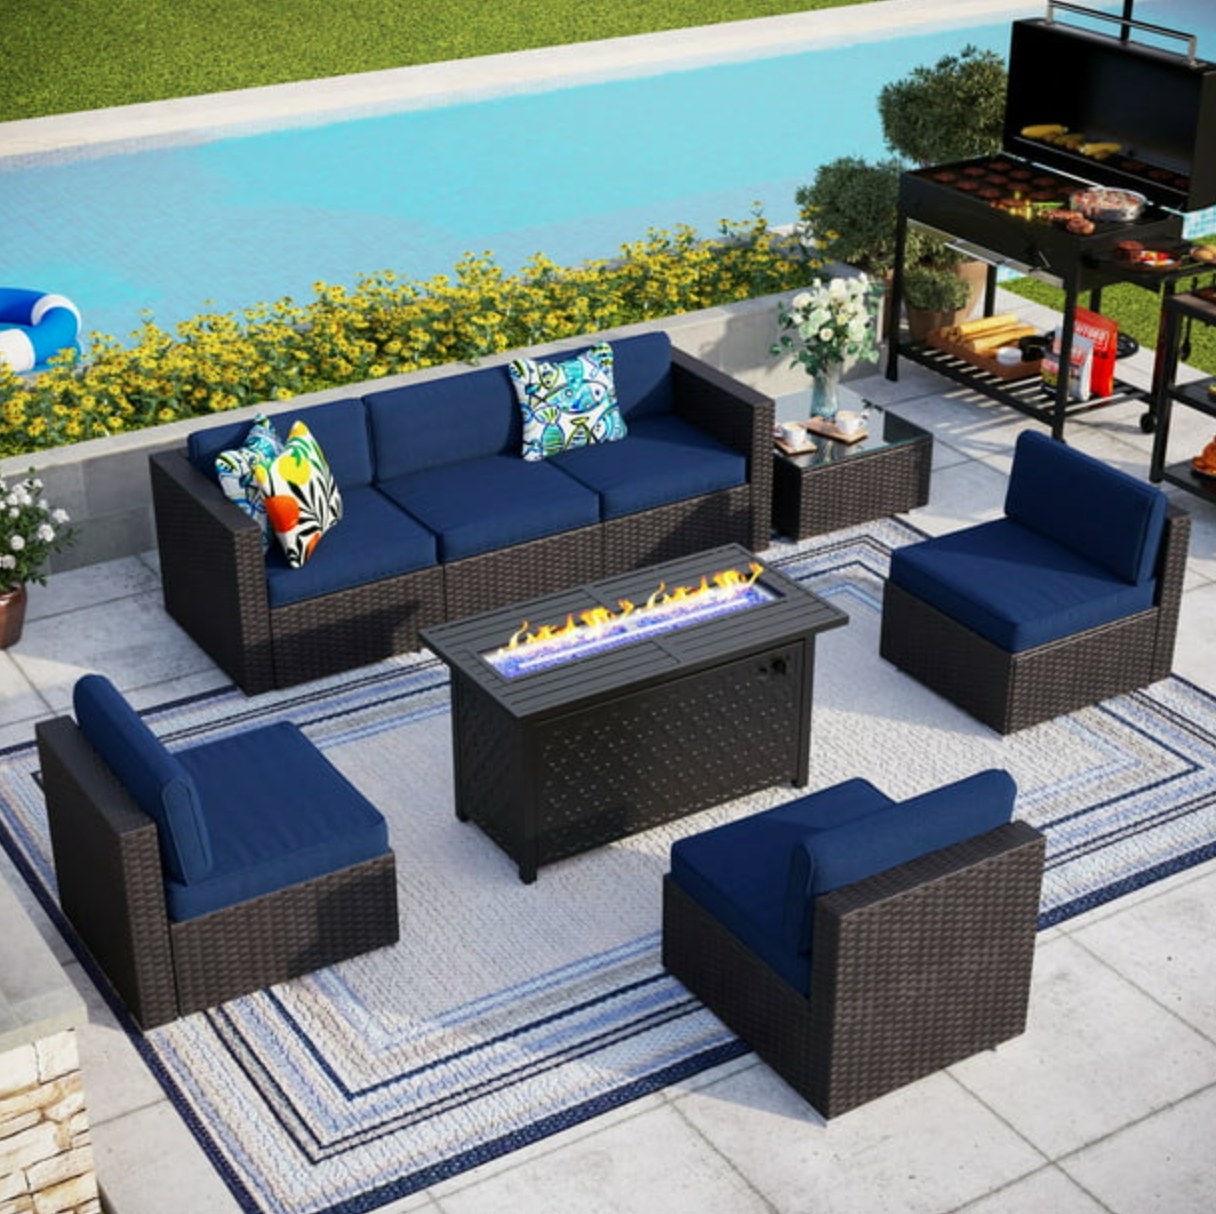 the dark wicker and navy cushioned set with a fire pit table in the center